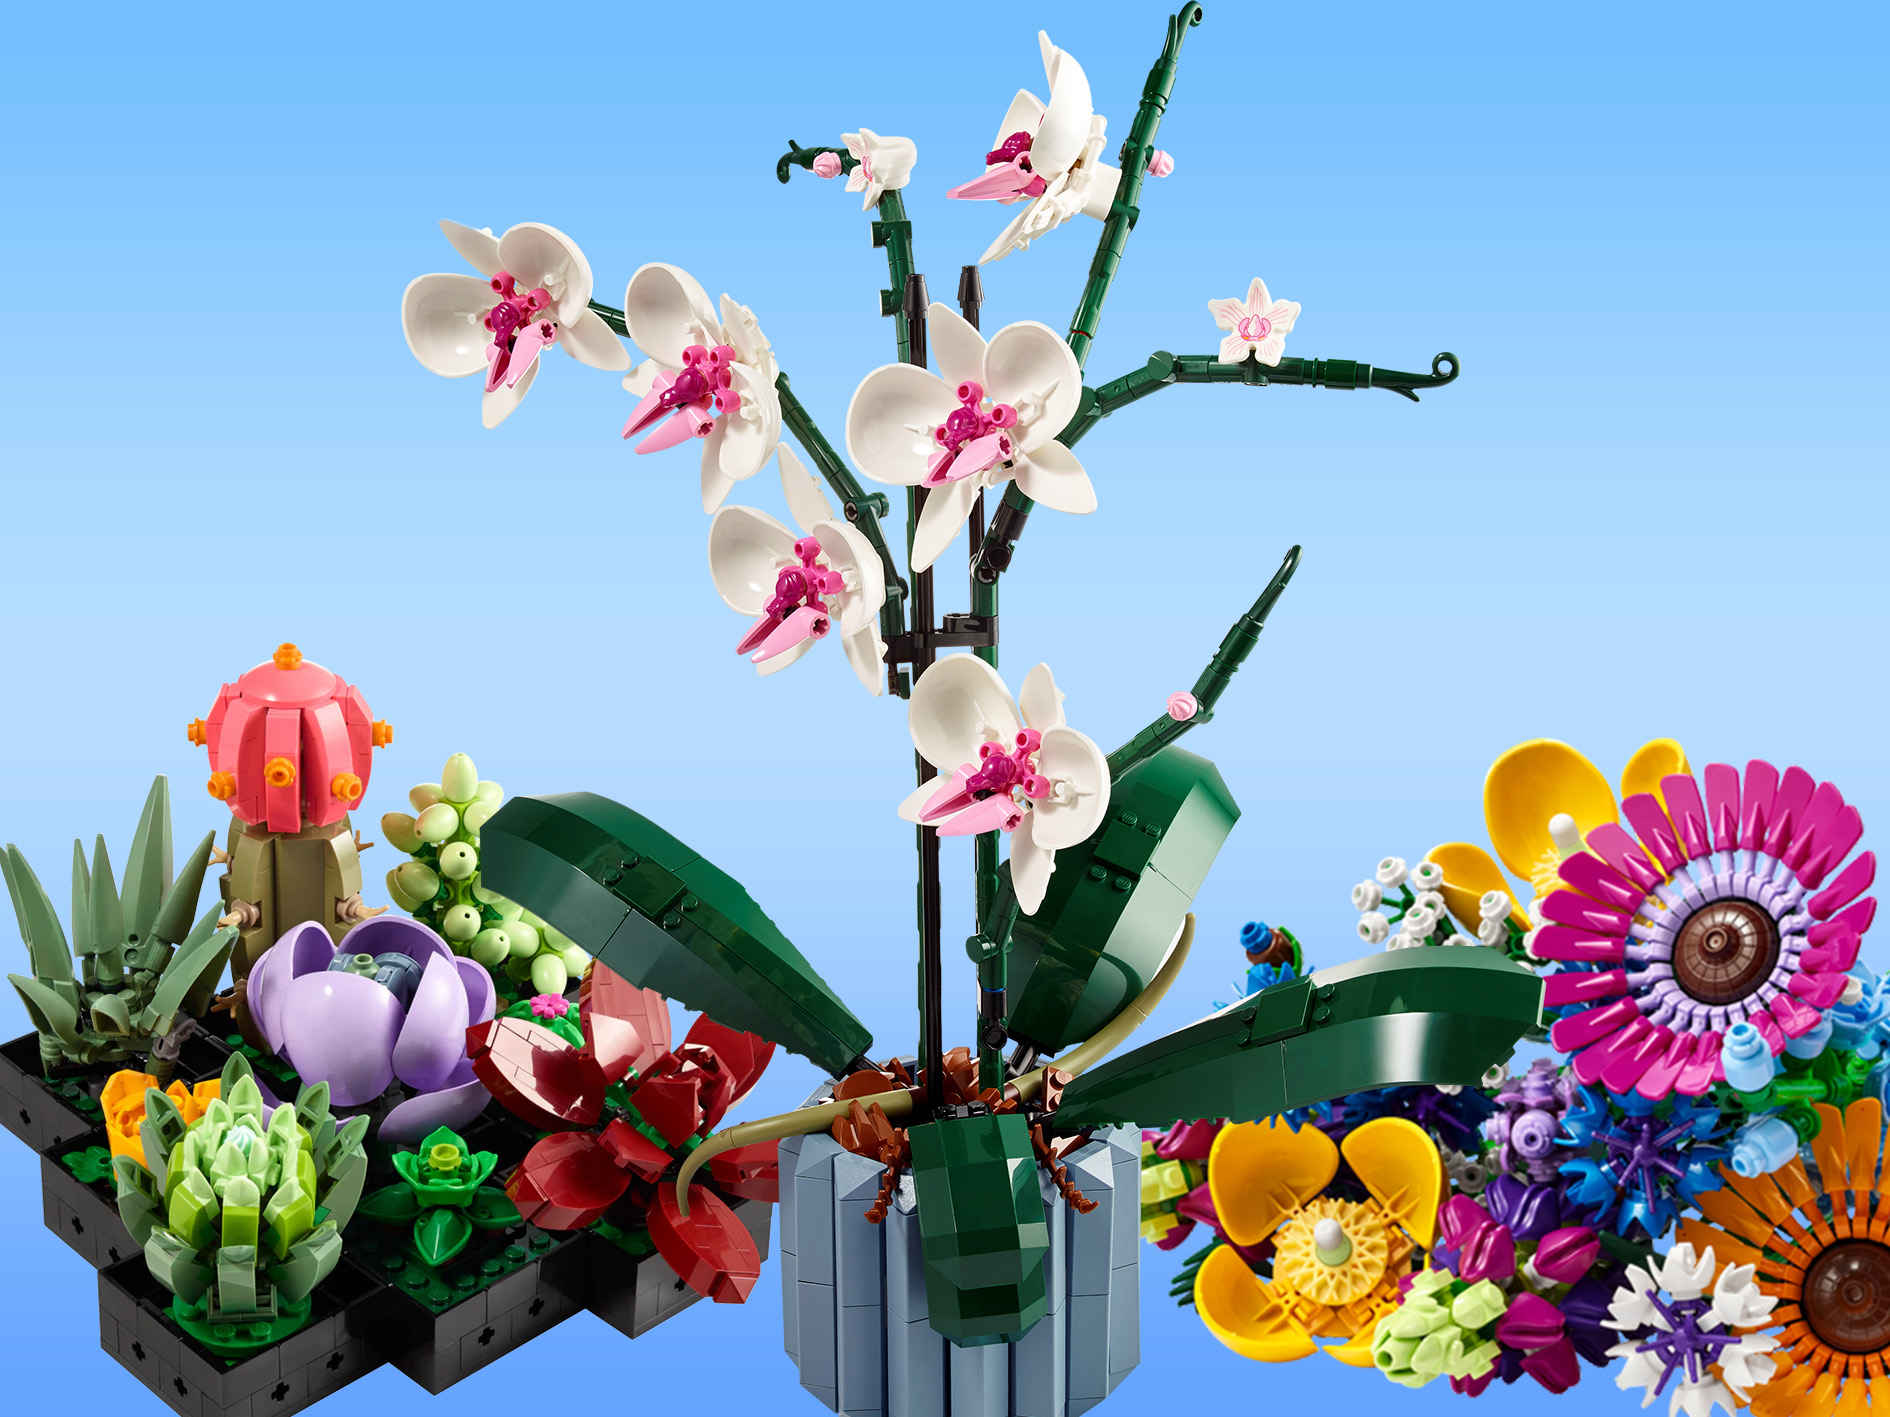 Must-have LEGO house plants for people who prefer more low